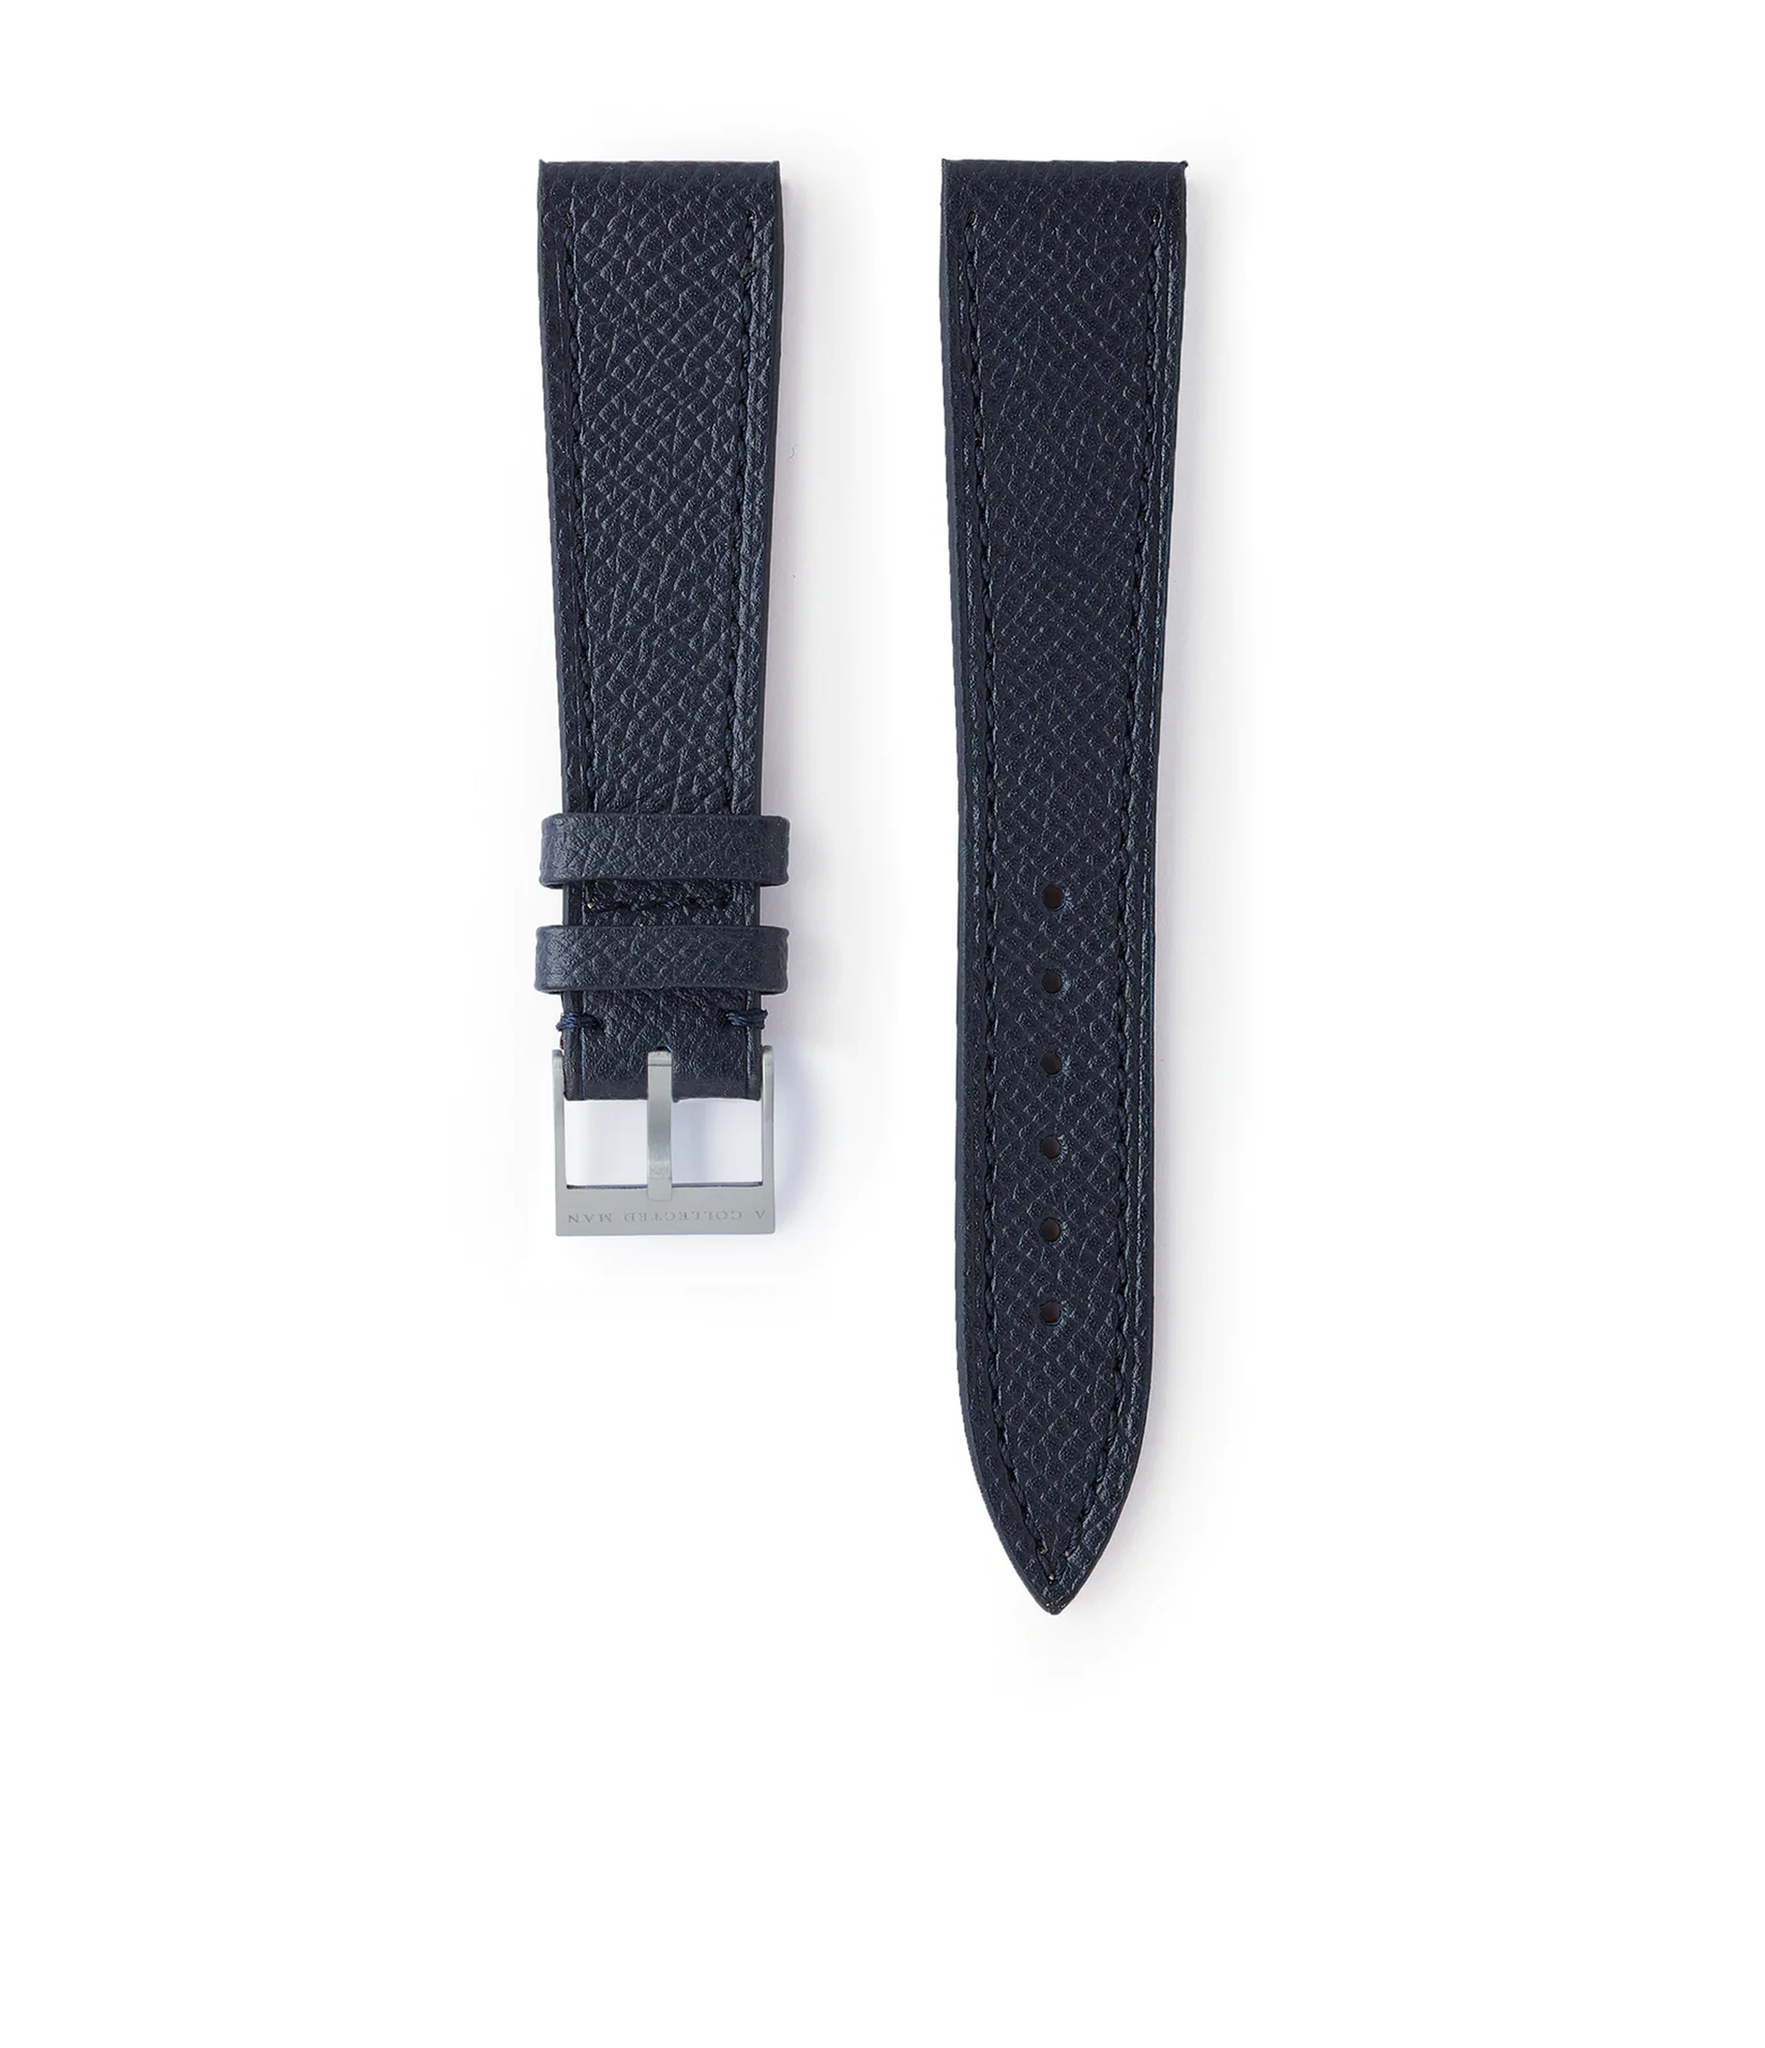 Buy La Rochelle Molequin watch strap grained navy blue calfskin leather quick-release springbars buckle handcrafted European-made for sale online at A Collected Man London